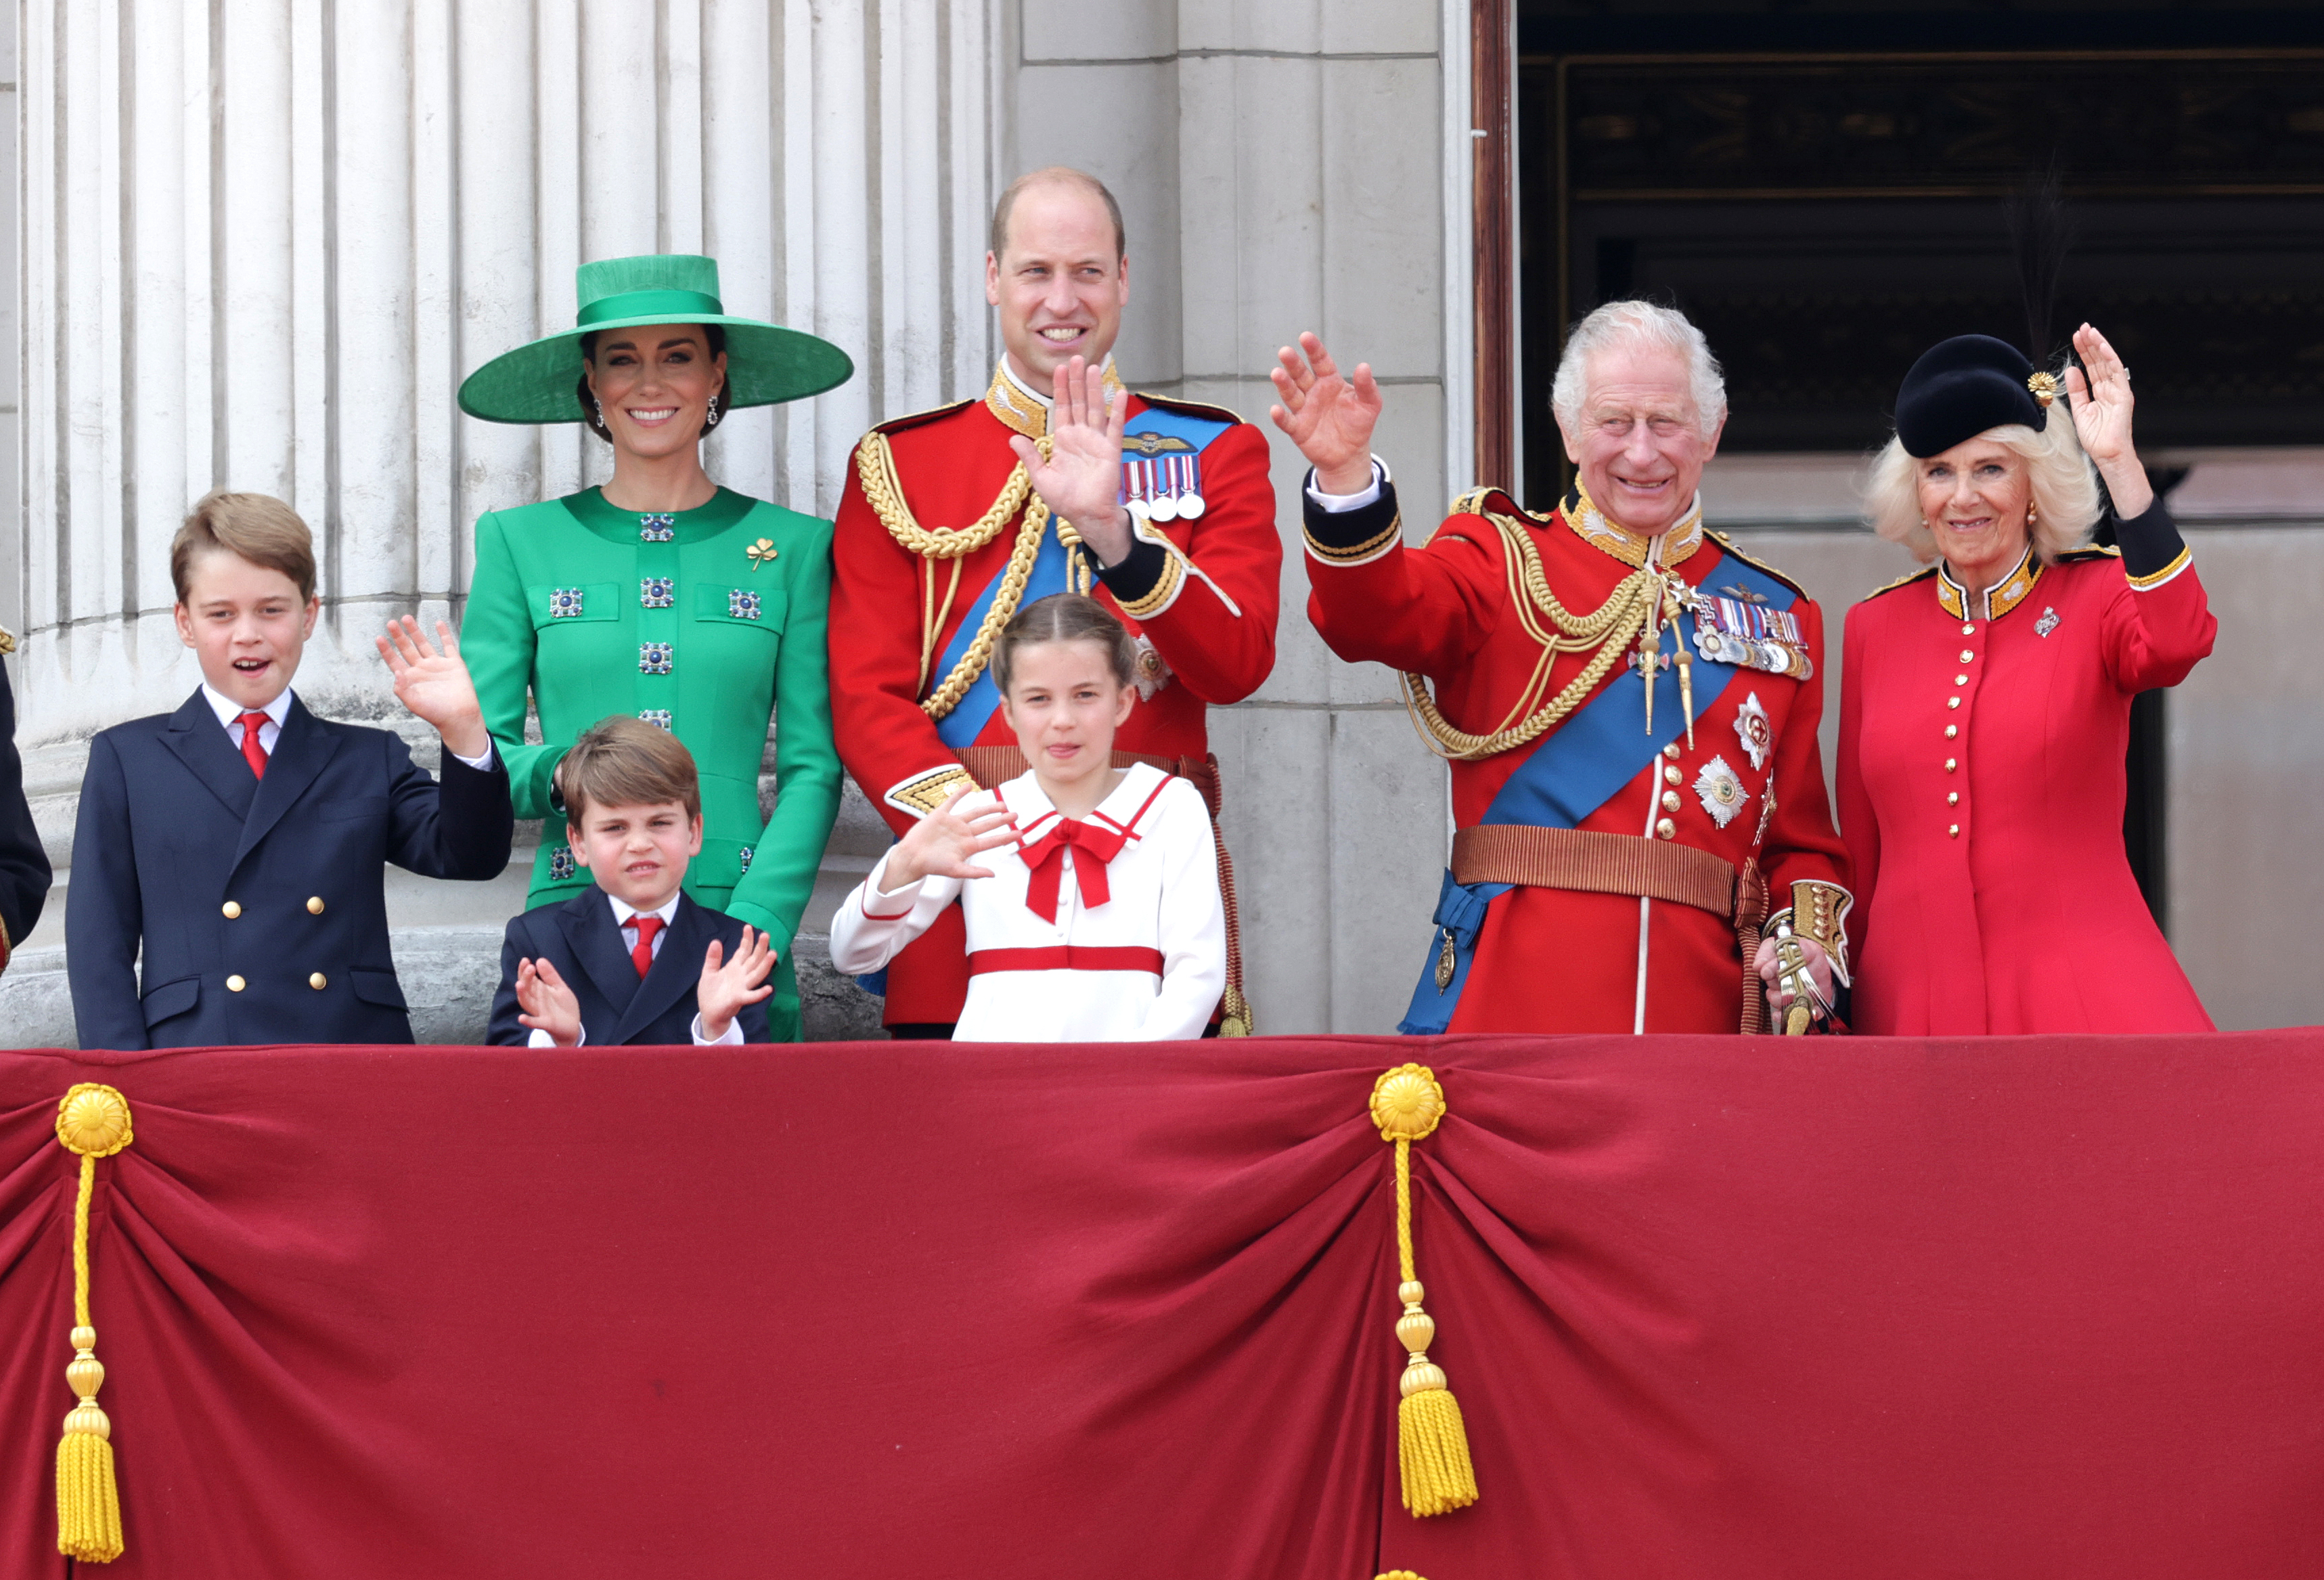 Prince Louis, Princess Charlotte, Prince George, Princess Catherine, Prince William, Queen Camilla, and King Charles III on the Buckingham Palace balcony during Trooping the Colour on June 17, 2023 in London, England | Source: Getty Images